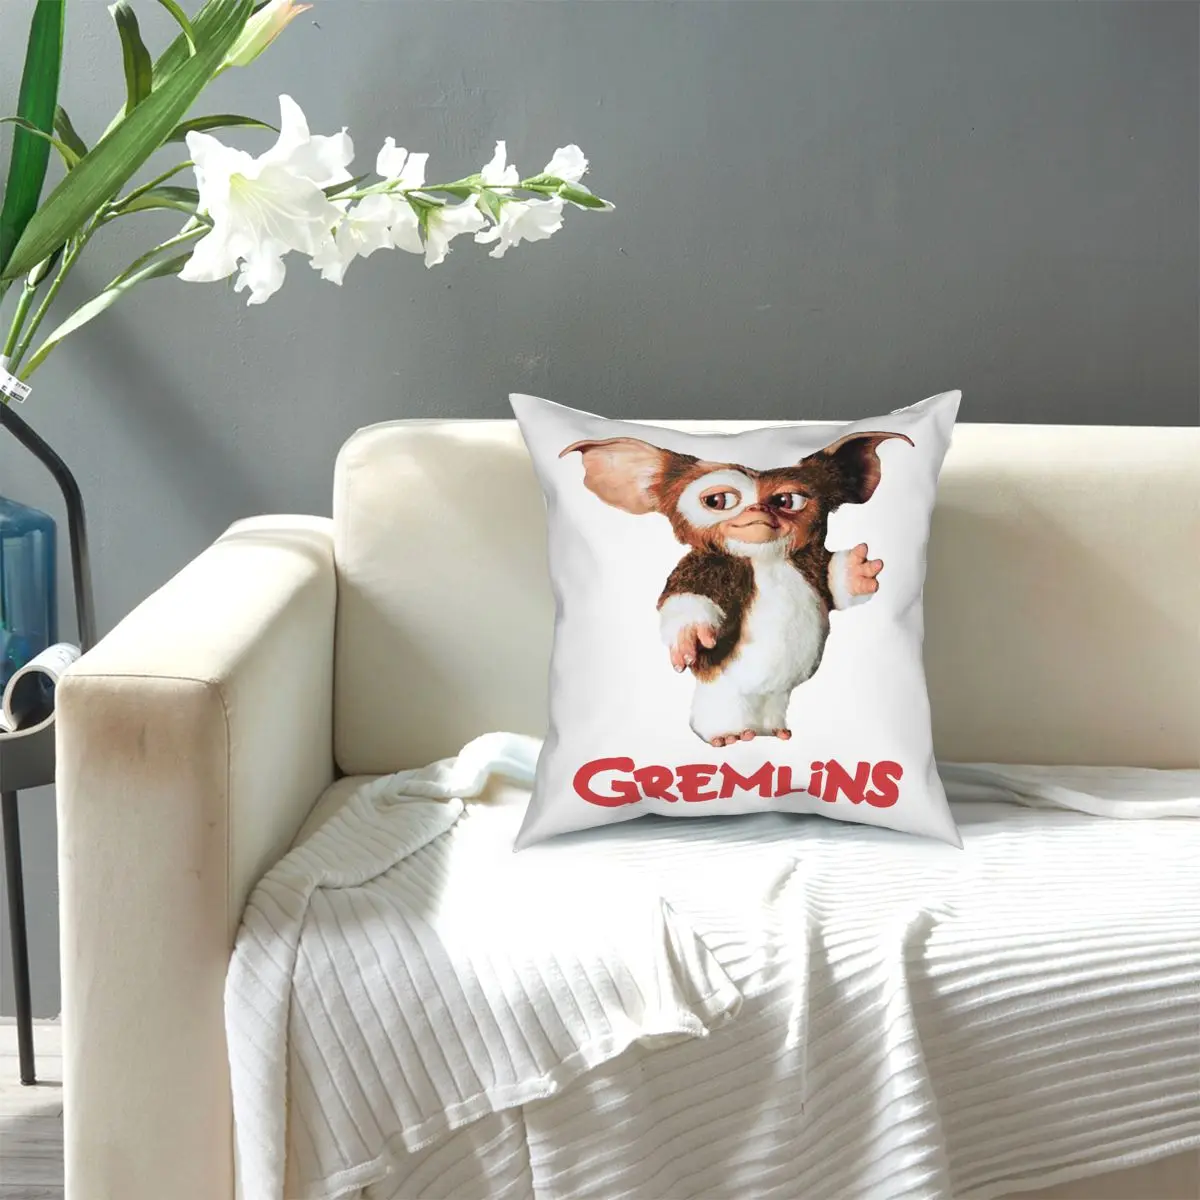 

Gremlins Gizmo Pillowcase Home Decor Gizmo 80s Movie Mogwai Sci Fi Cushions Throw Pillow for Living Room Double-sided Printing